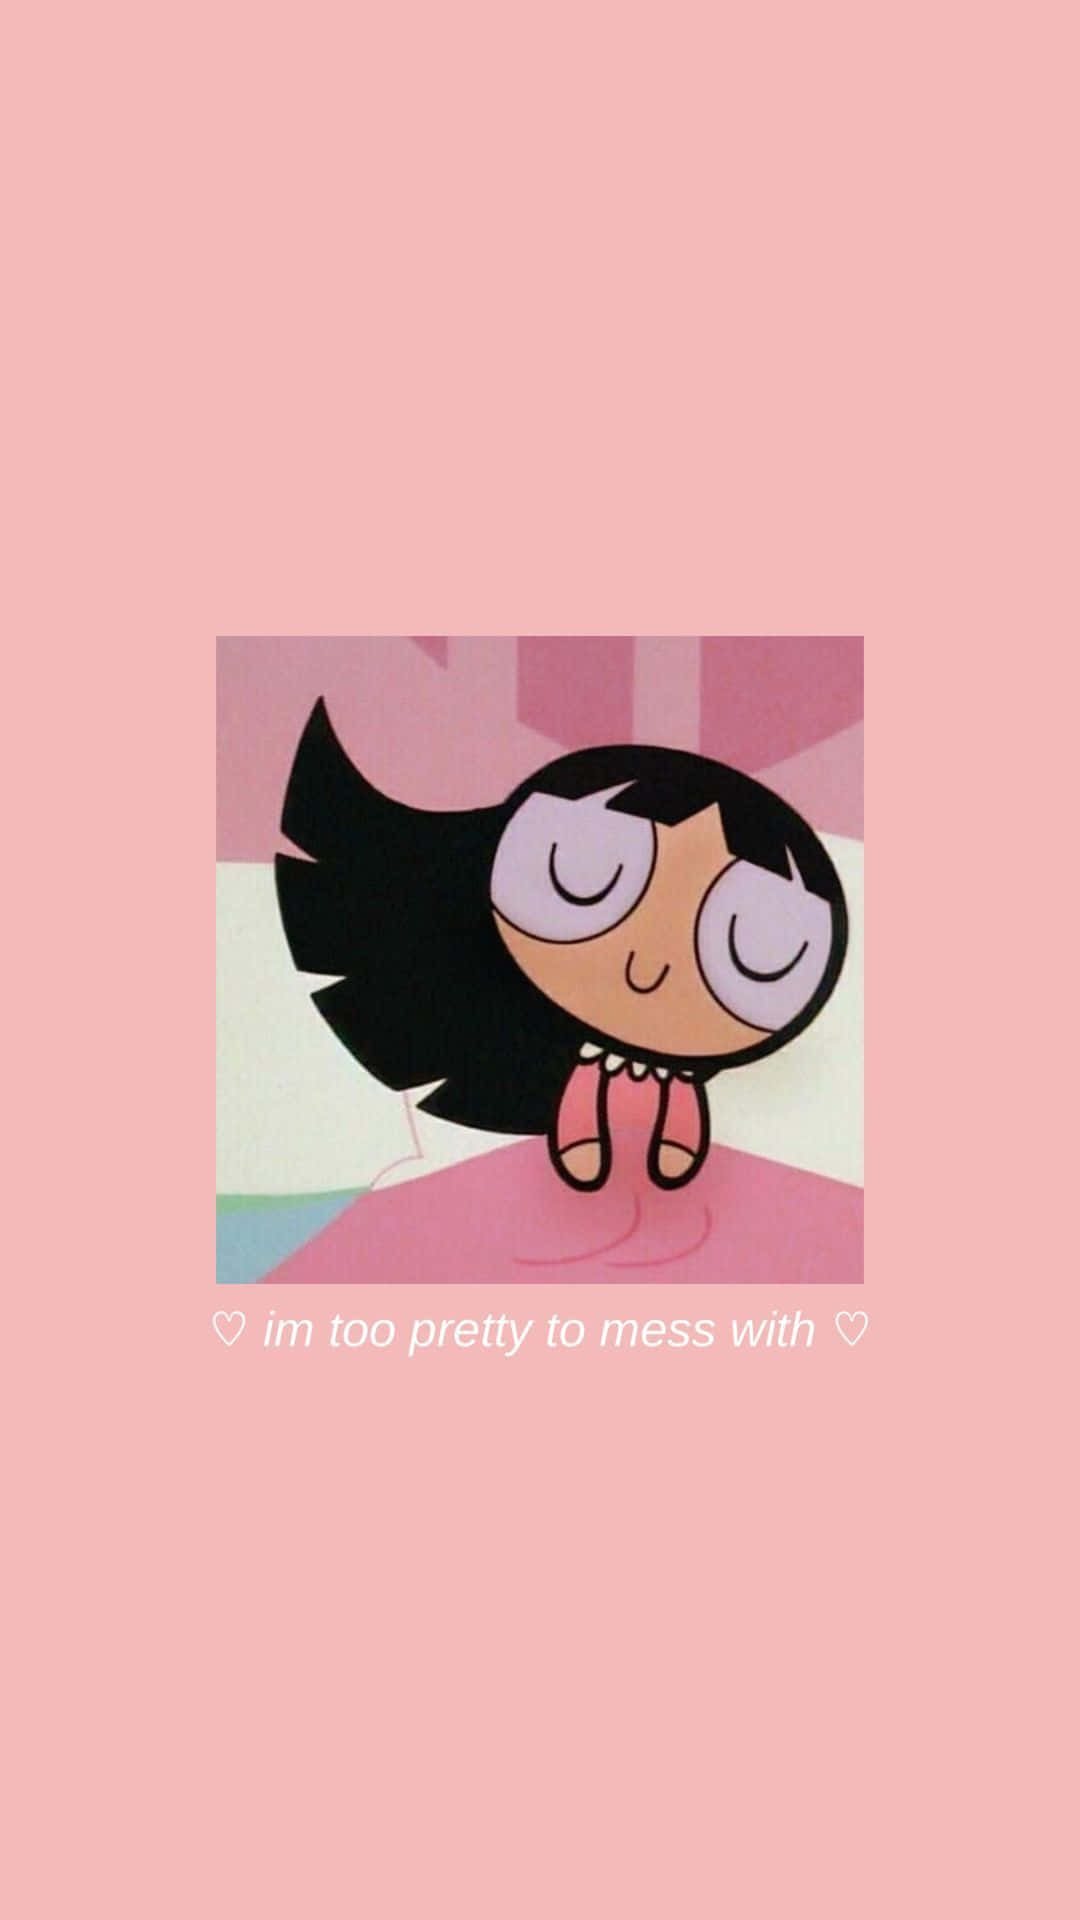 Buttercup Powerpuff Girls Aesthetic Illustration Picture